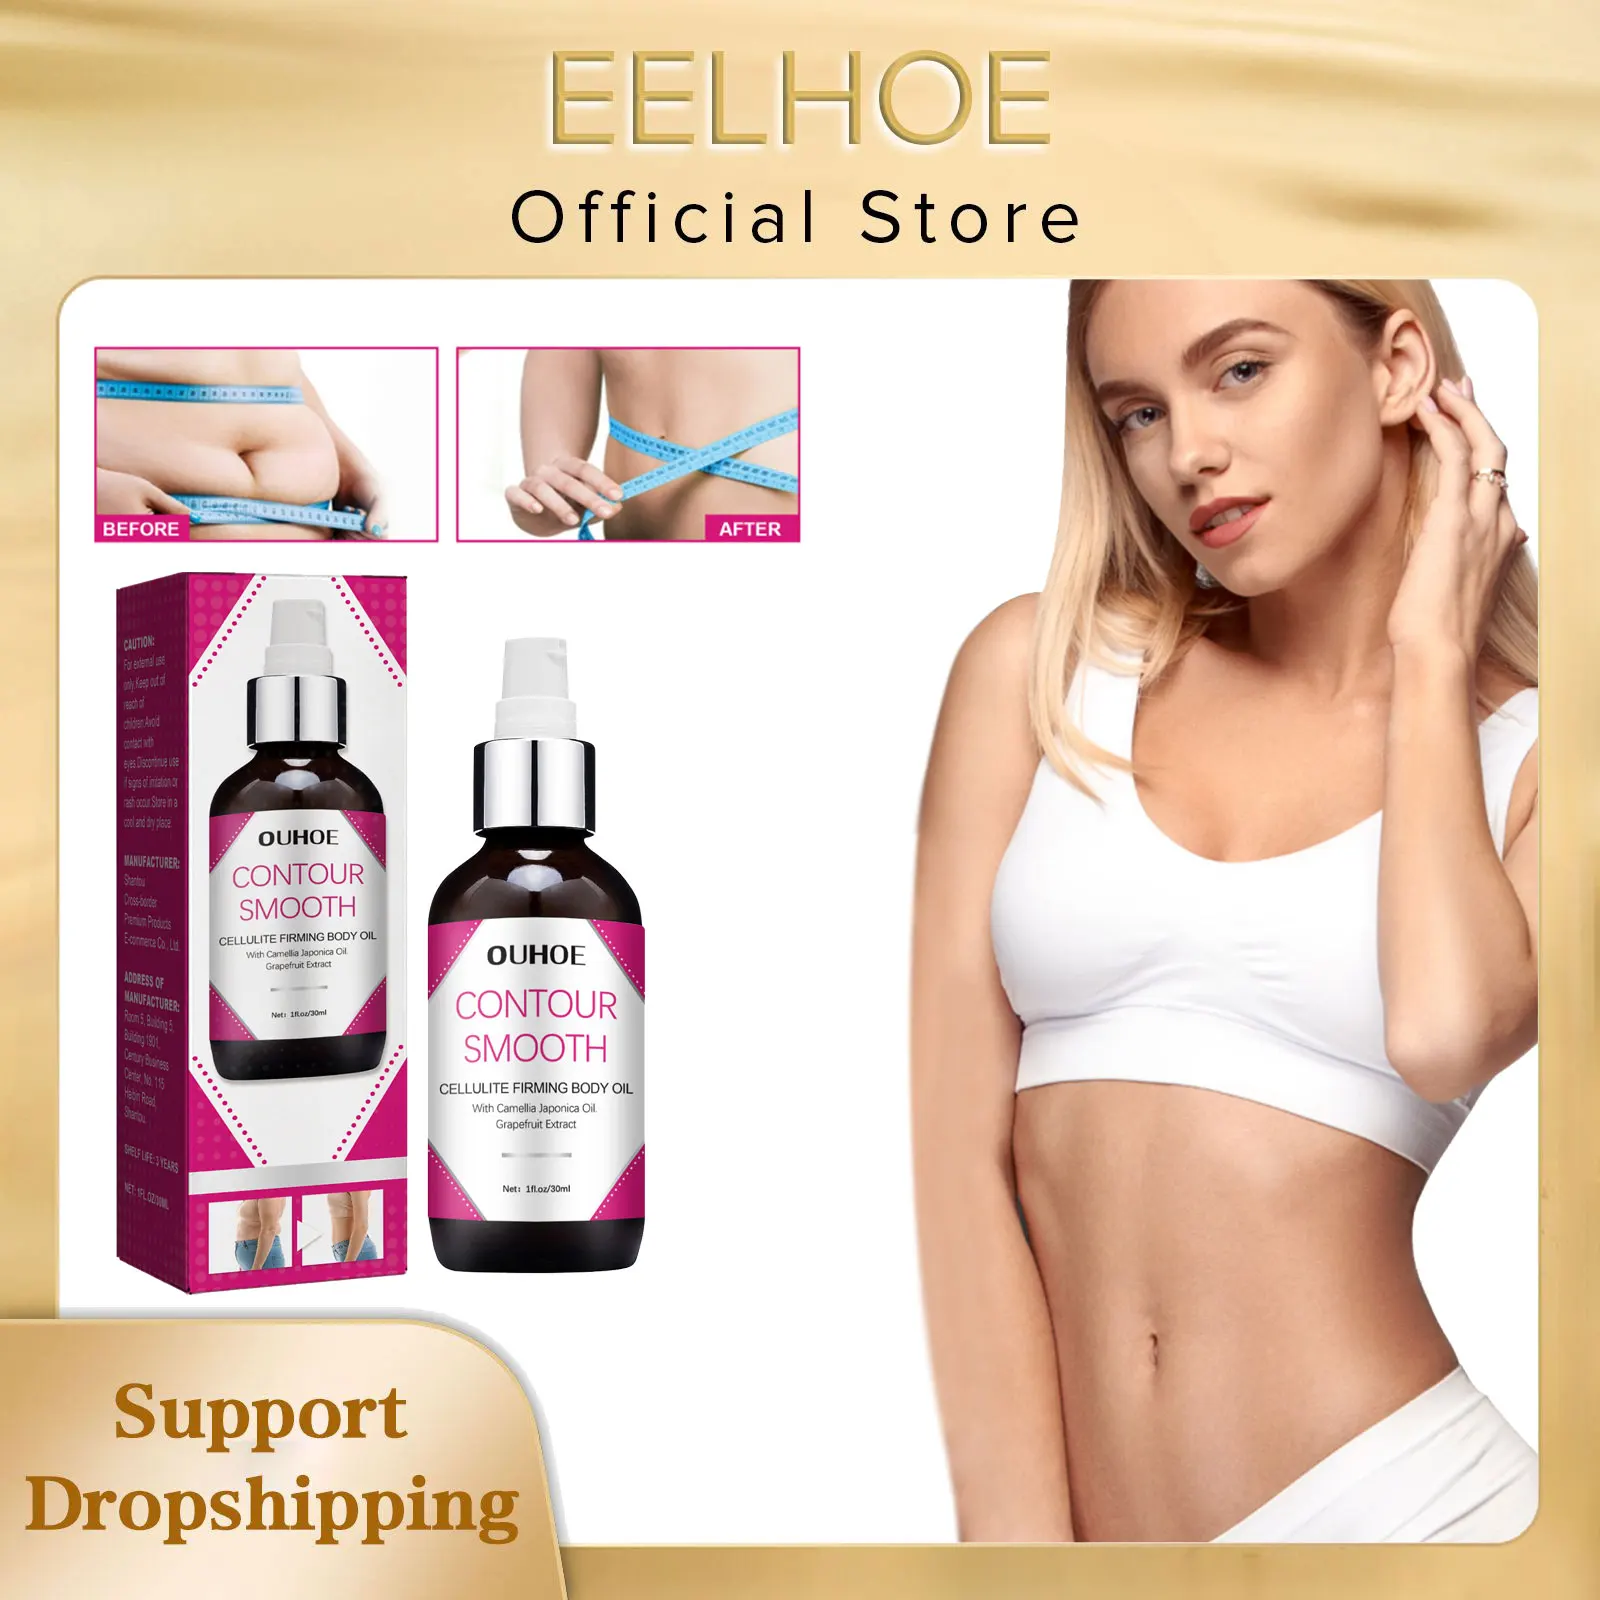 

Slimming Oil Anti Cellulite Tighten Tummy Fat Burning Massage Abdominal Shaping Promote Losing Weight Firming Sculpting Body Oil